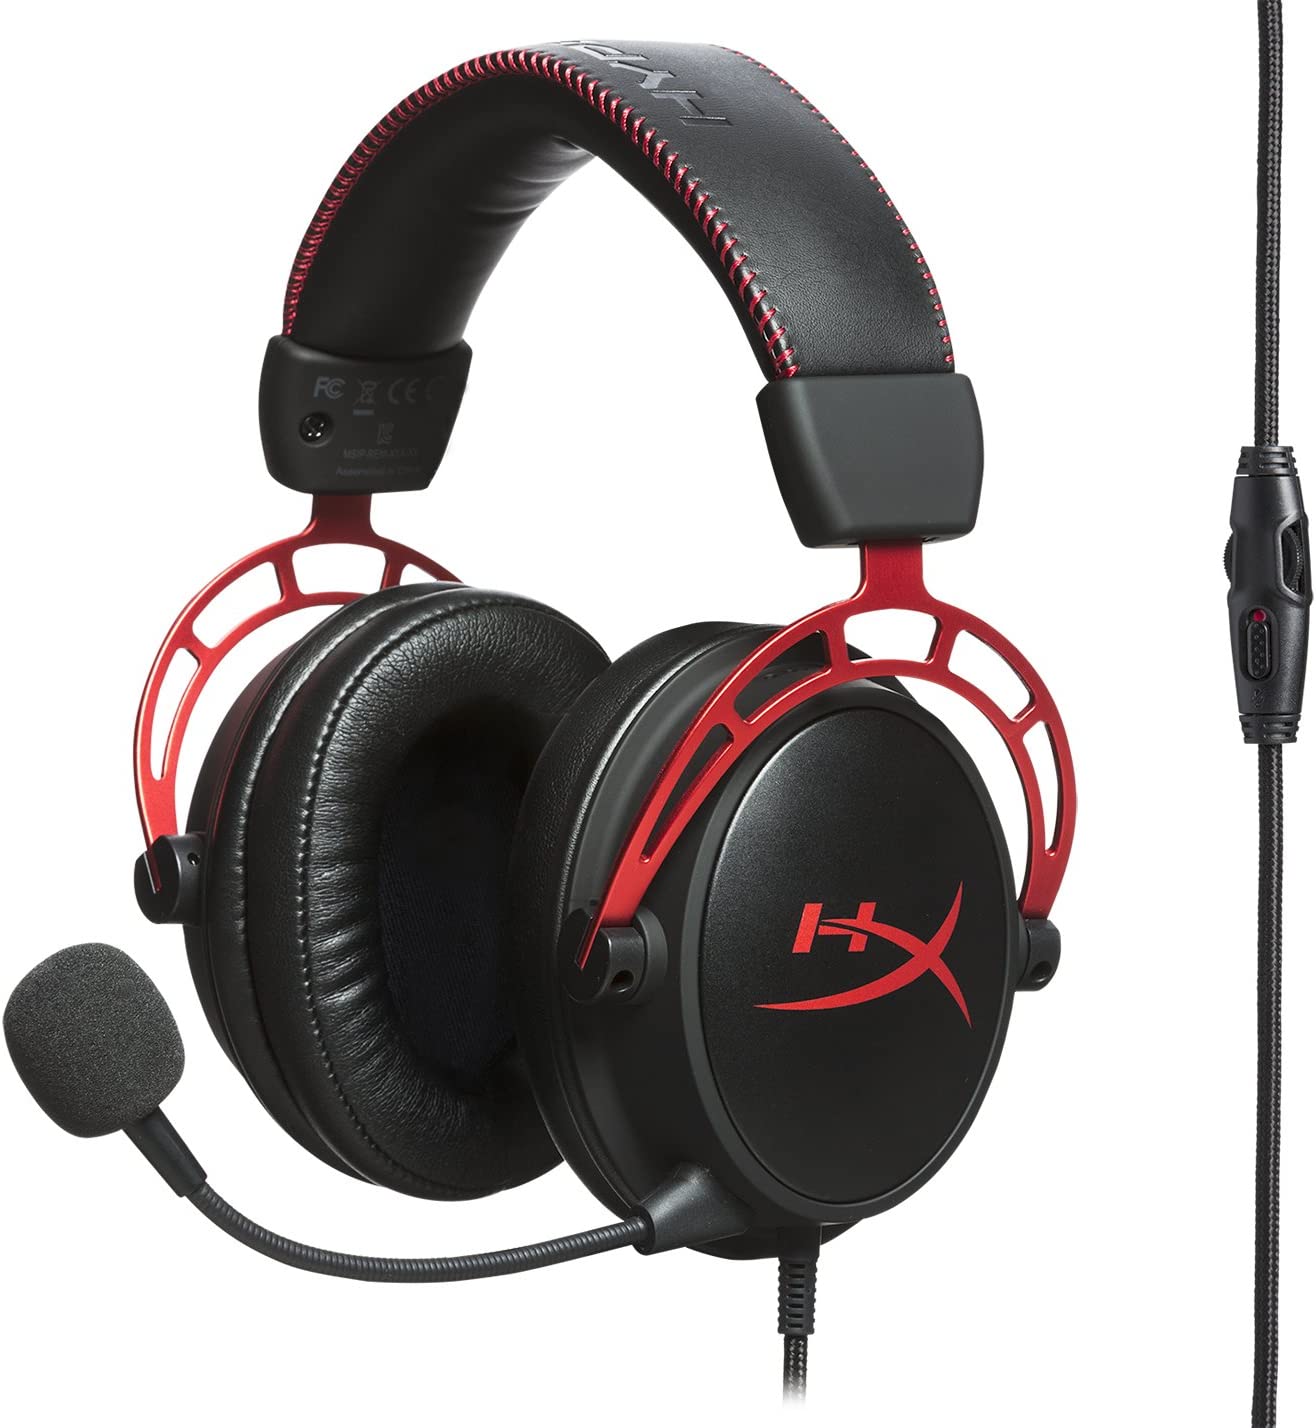 HyperX Cloud Alpha - Gaming Headset, Dual Chamber Drivers, Legendary Comfort, Aluminum Frame, Detachable Microphone, Works on PC, PS4, PS5, Xbox One/ Series X|S, Nintendo Switch and Mobile – Red ( WITHOUT BOX AMERICAN USED )